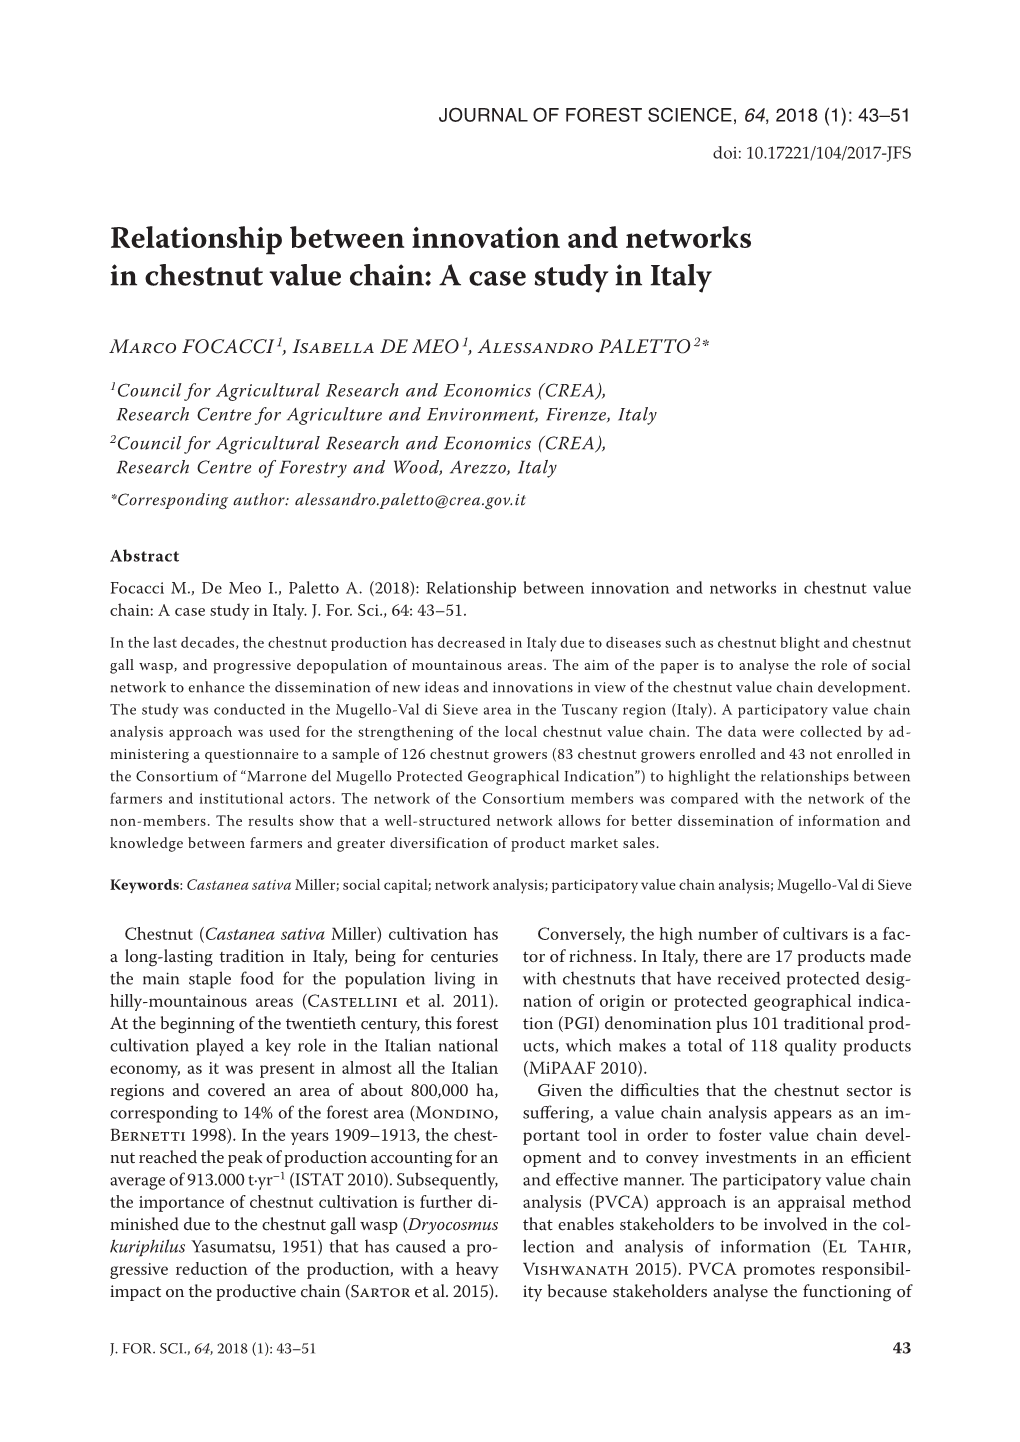 Relationship Between Innovation and Networks in Chestnut Value Chain: a Case Study in Italy